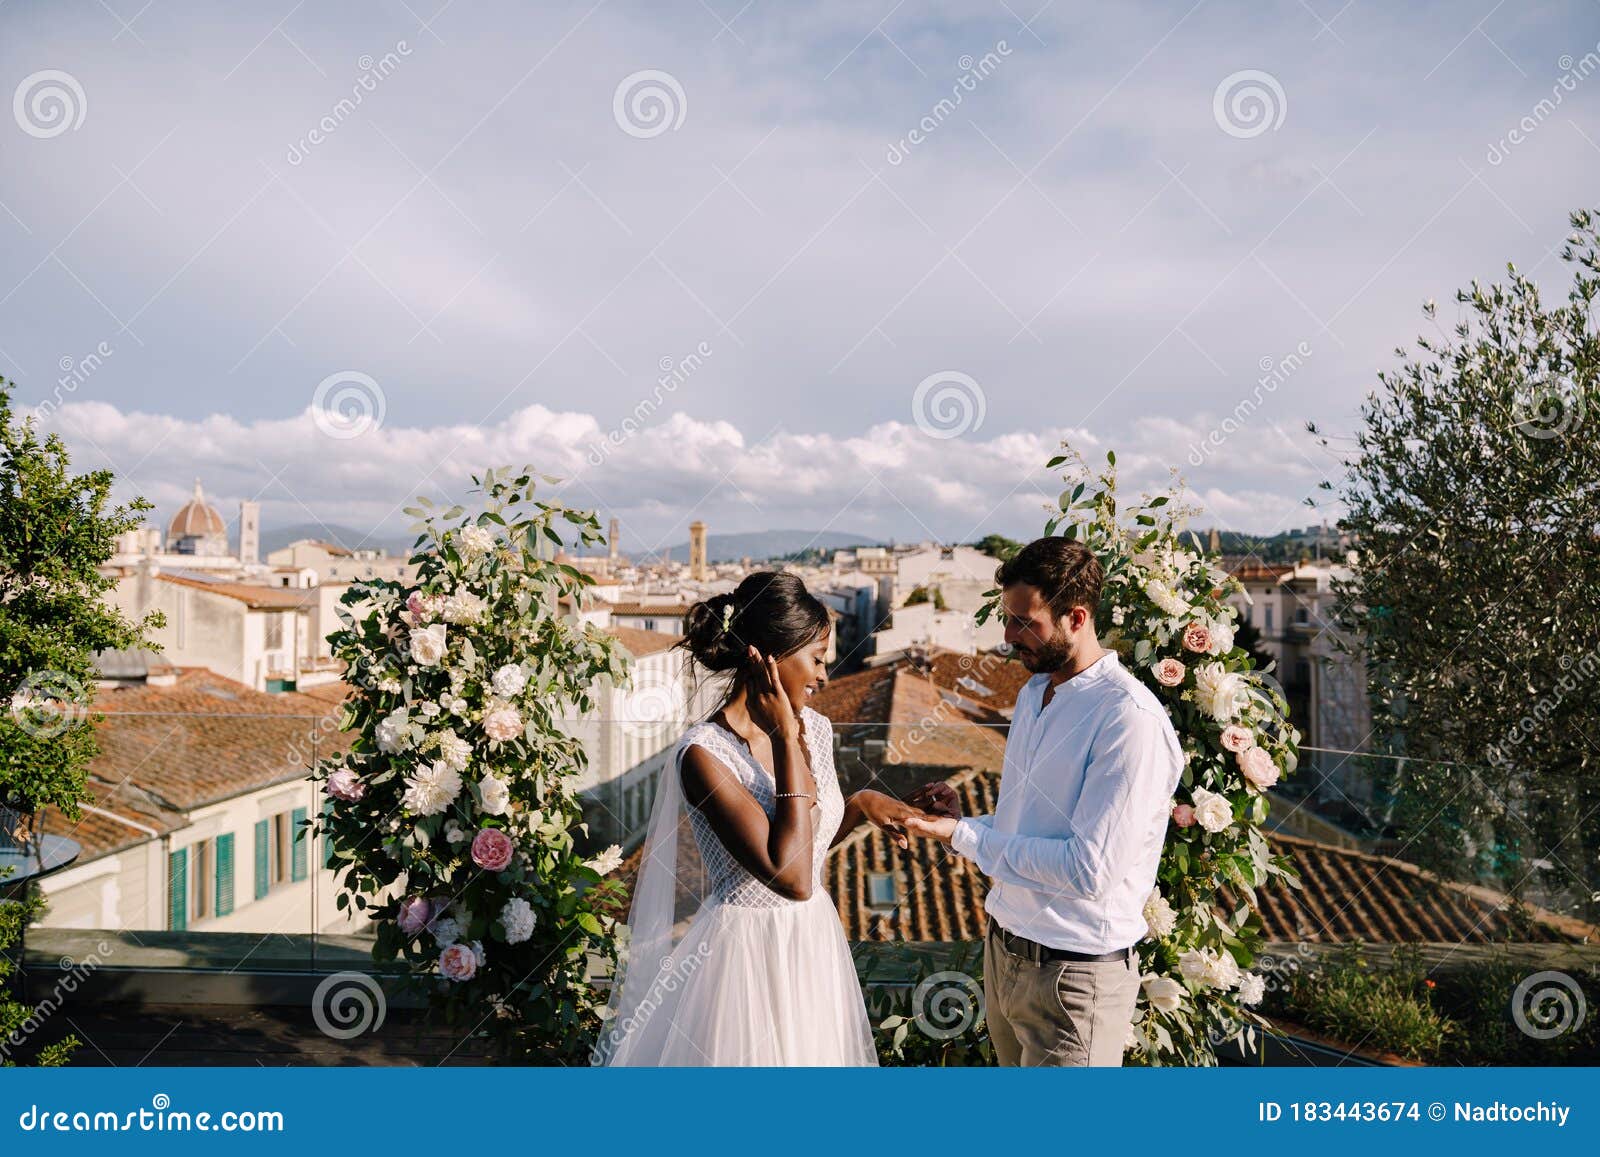 destination fine-art wedding in florence, italy. multiracial wedding couple. a wedding ceremony on the roof of the